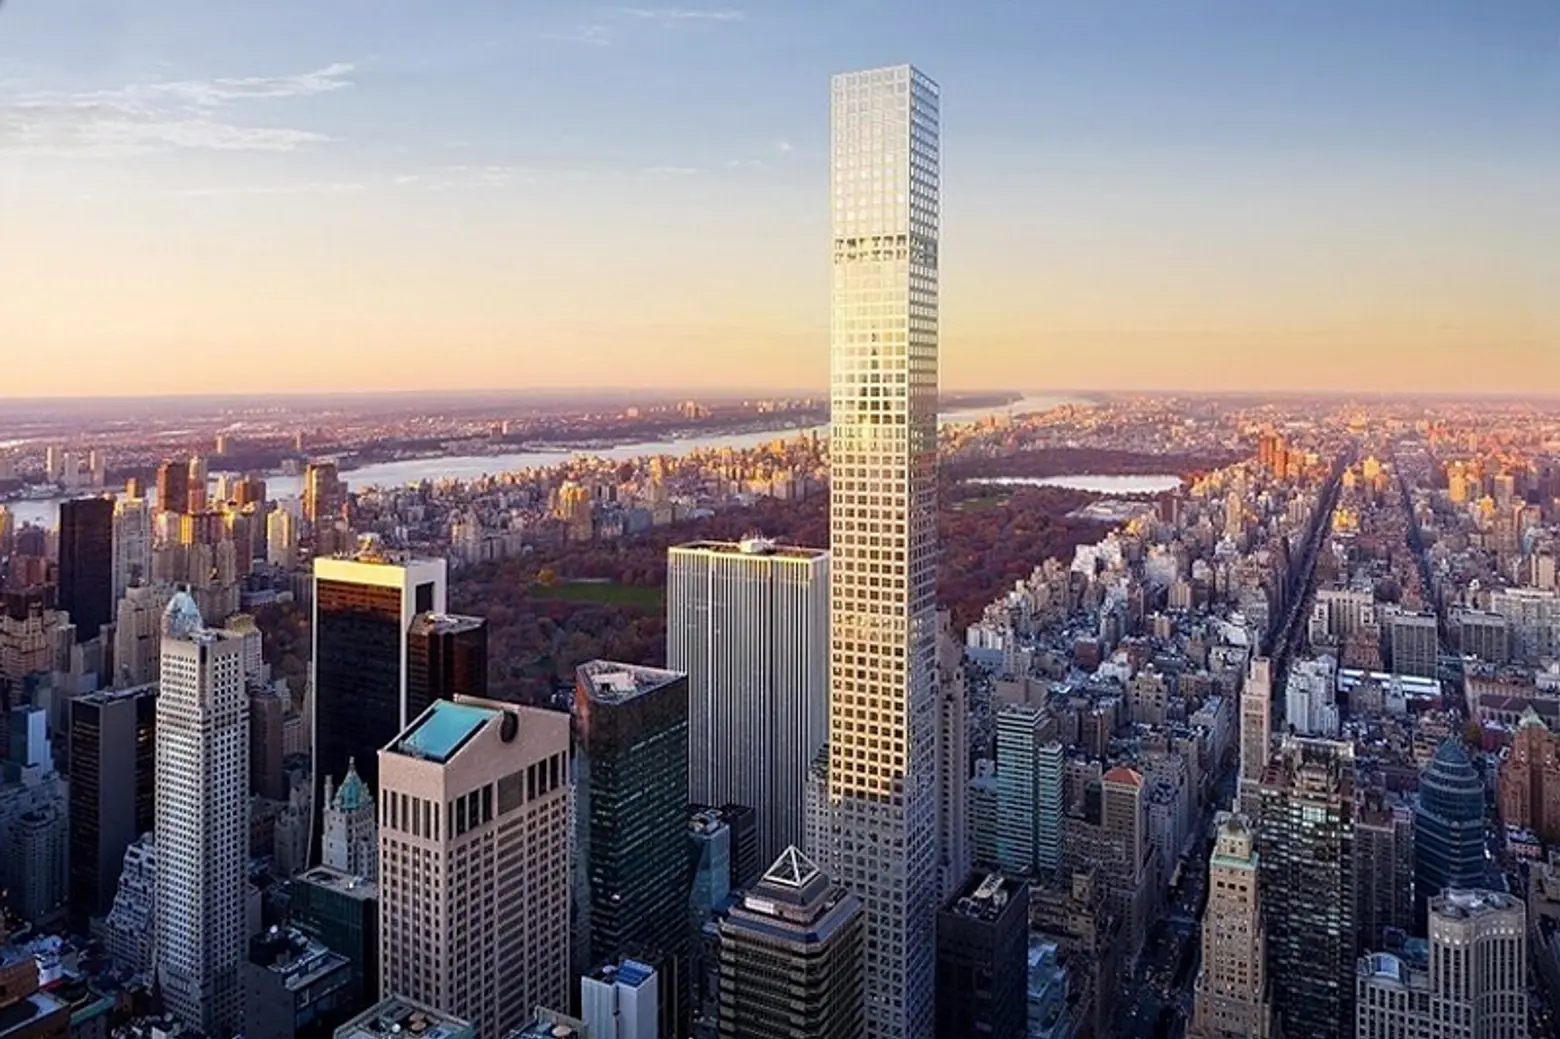 New Yorker Book Review Calls 432 Park the Oligarch’s Erection